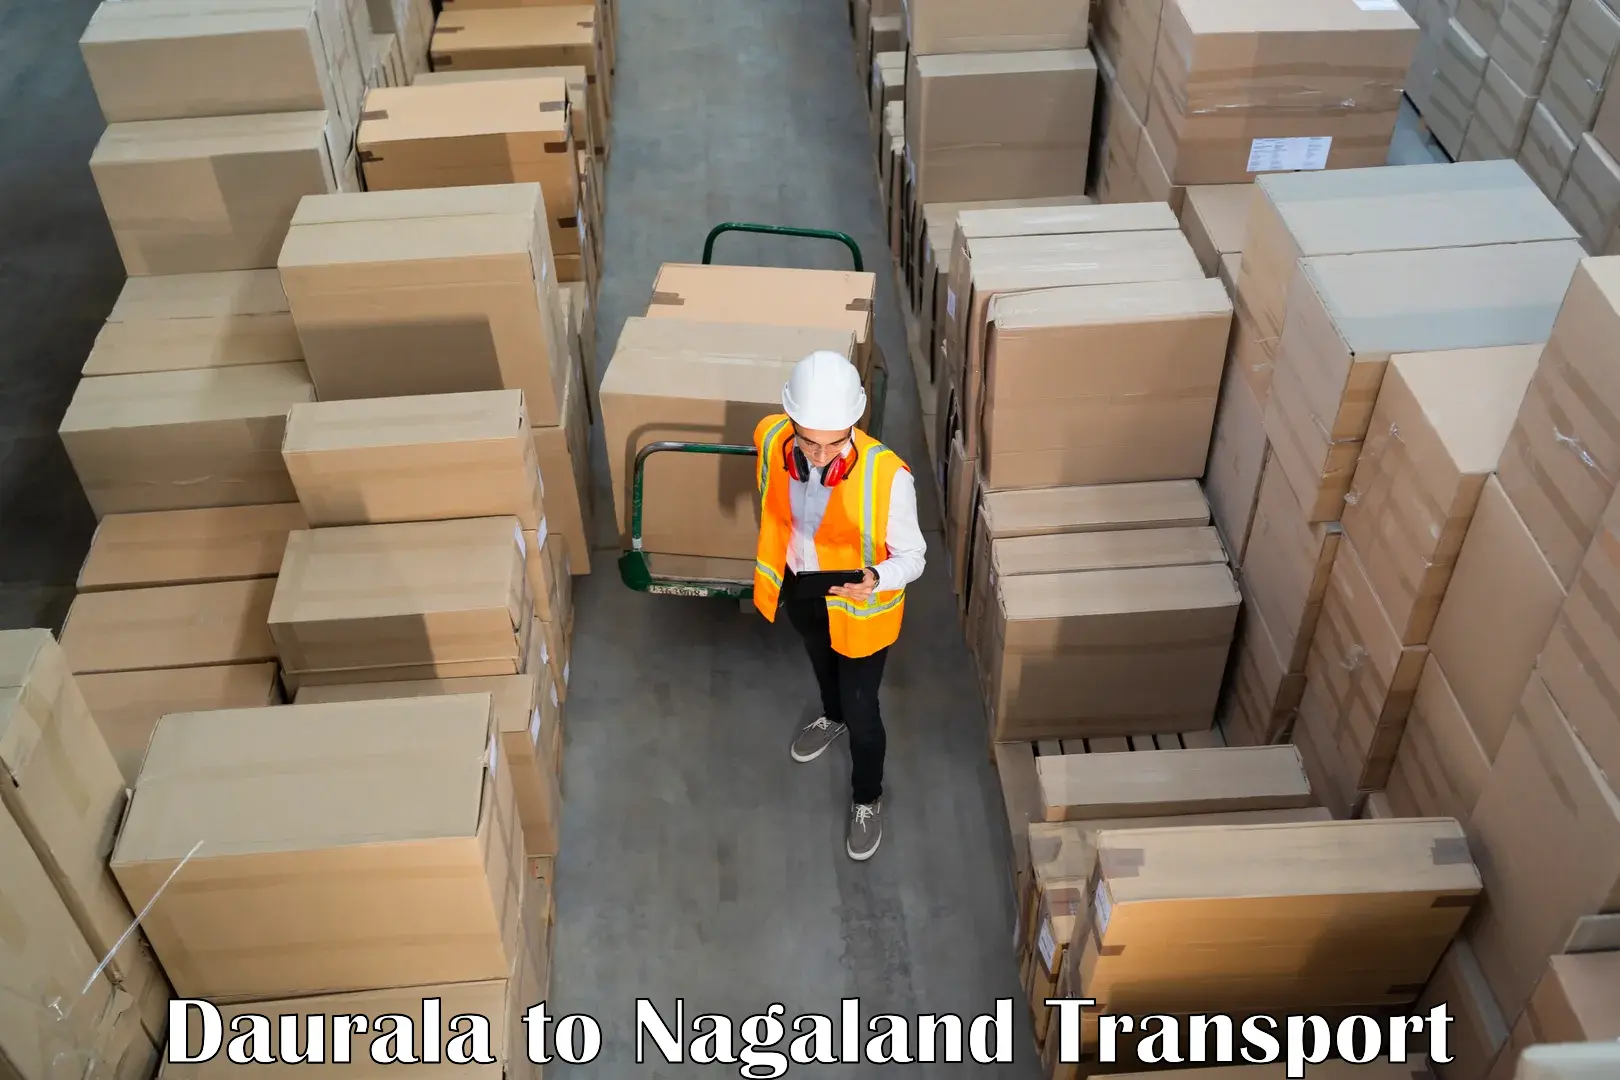 Goods delivery service Daurala to Dimapur